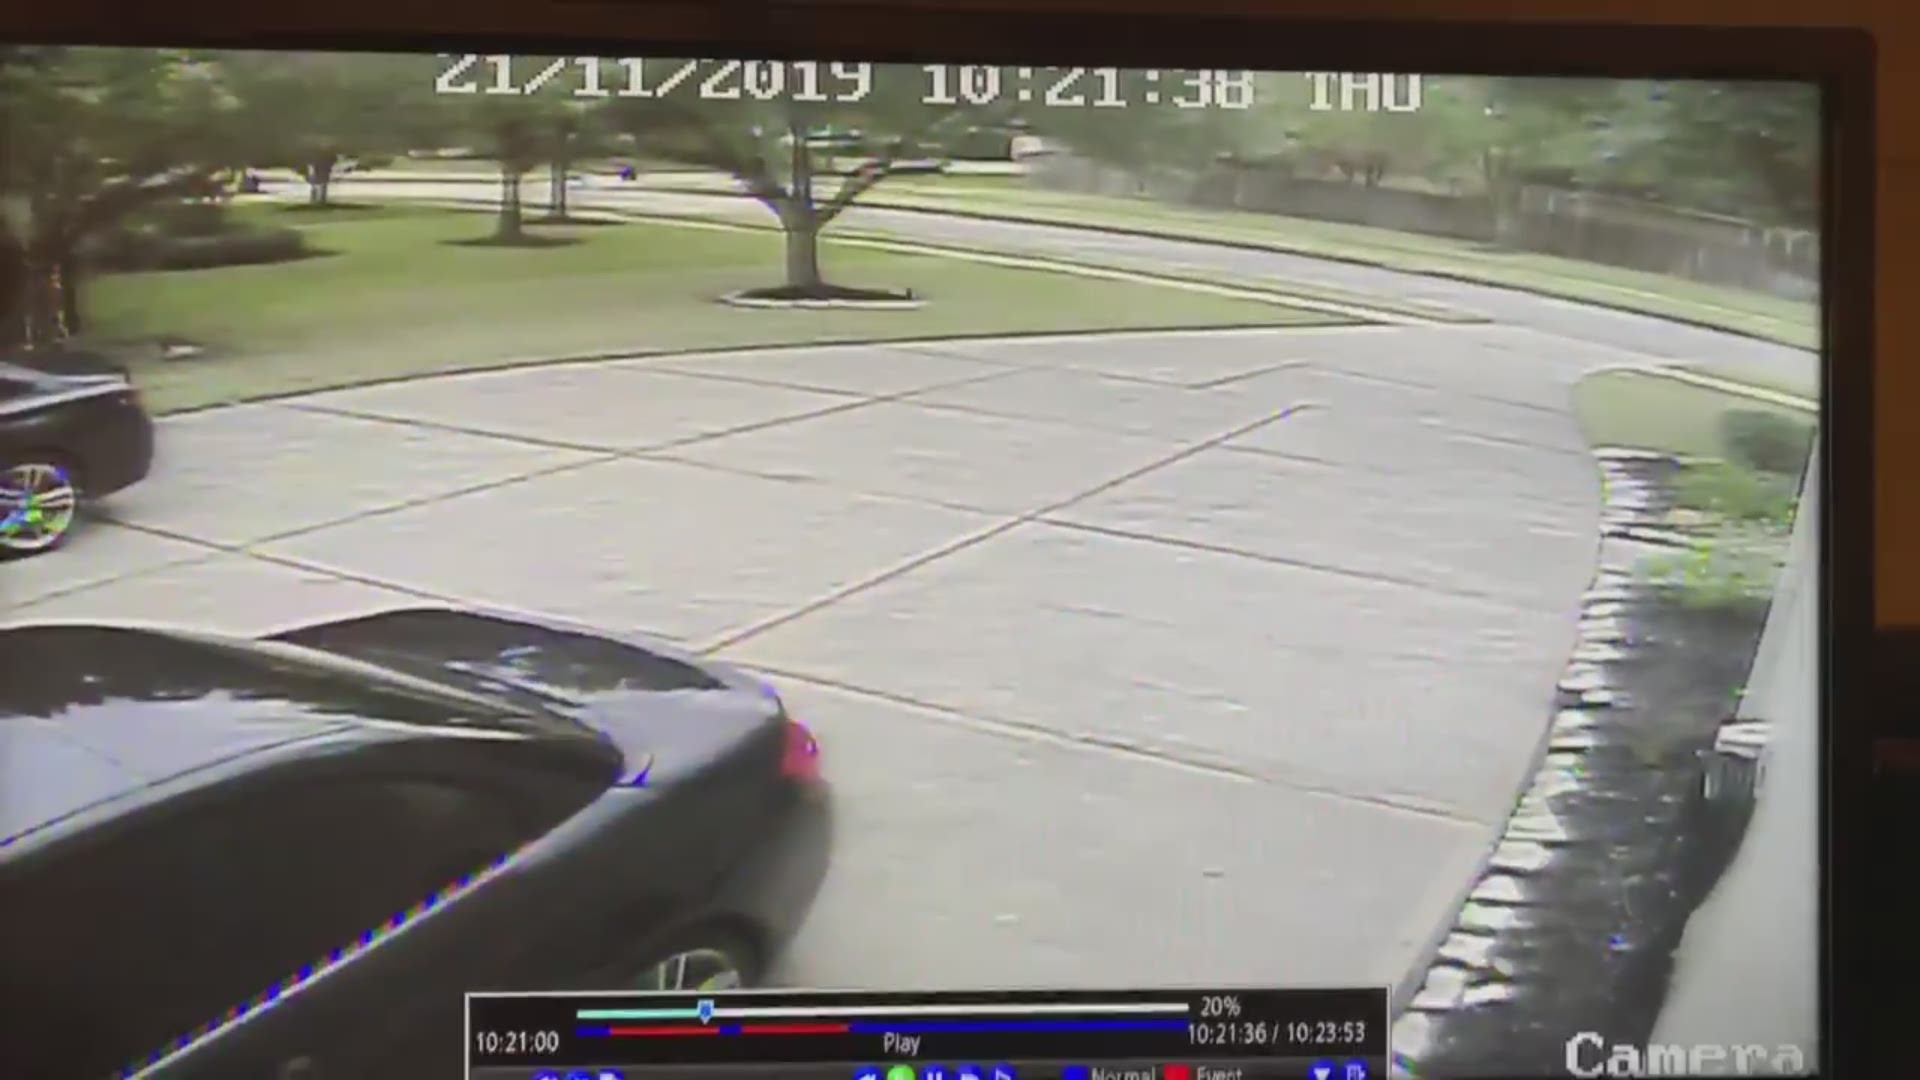 Harris County Precinct 3 shared video of a large SUV doing donuts in someone's front yard before crashing into a parked car.